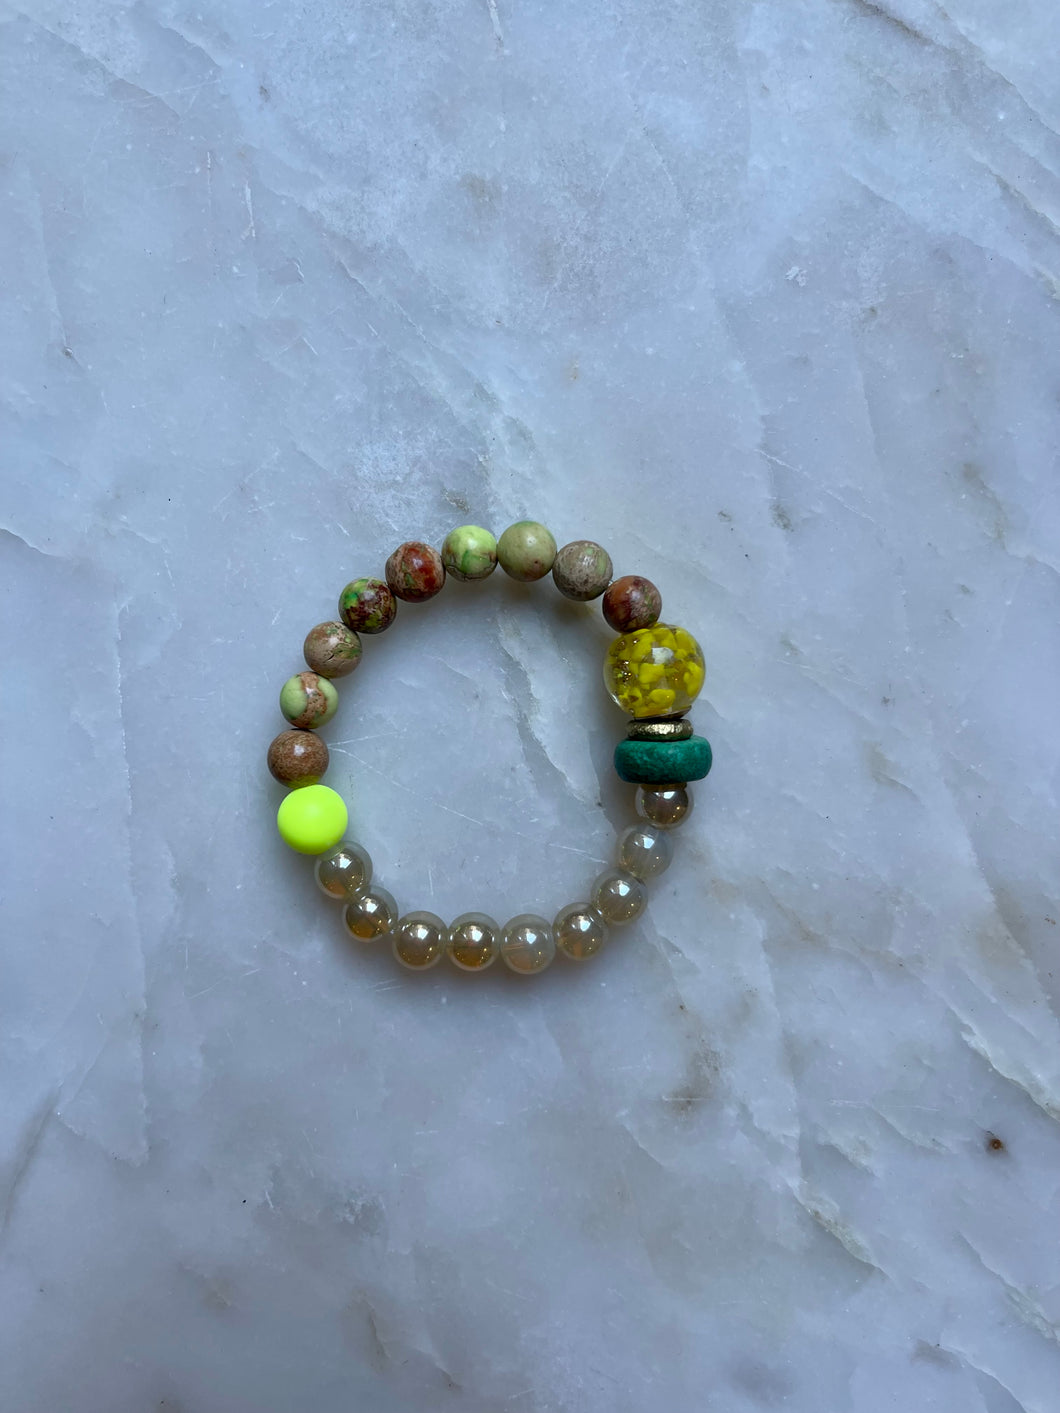 The Green is Good Fortune bracelet